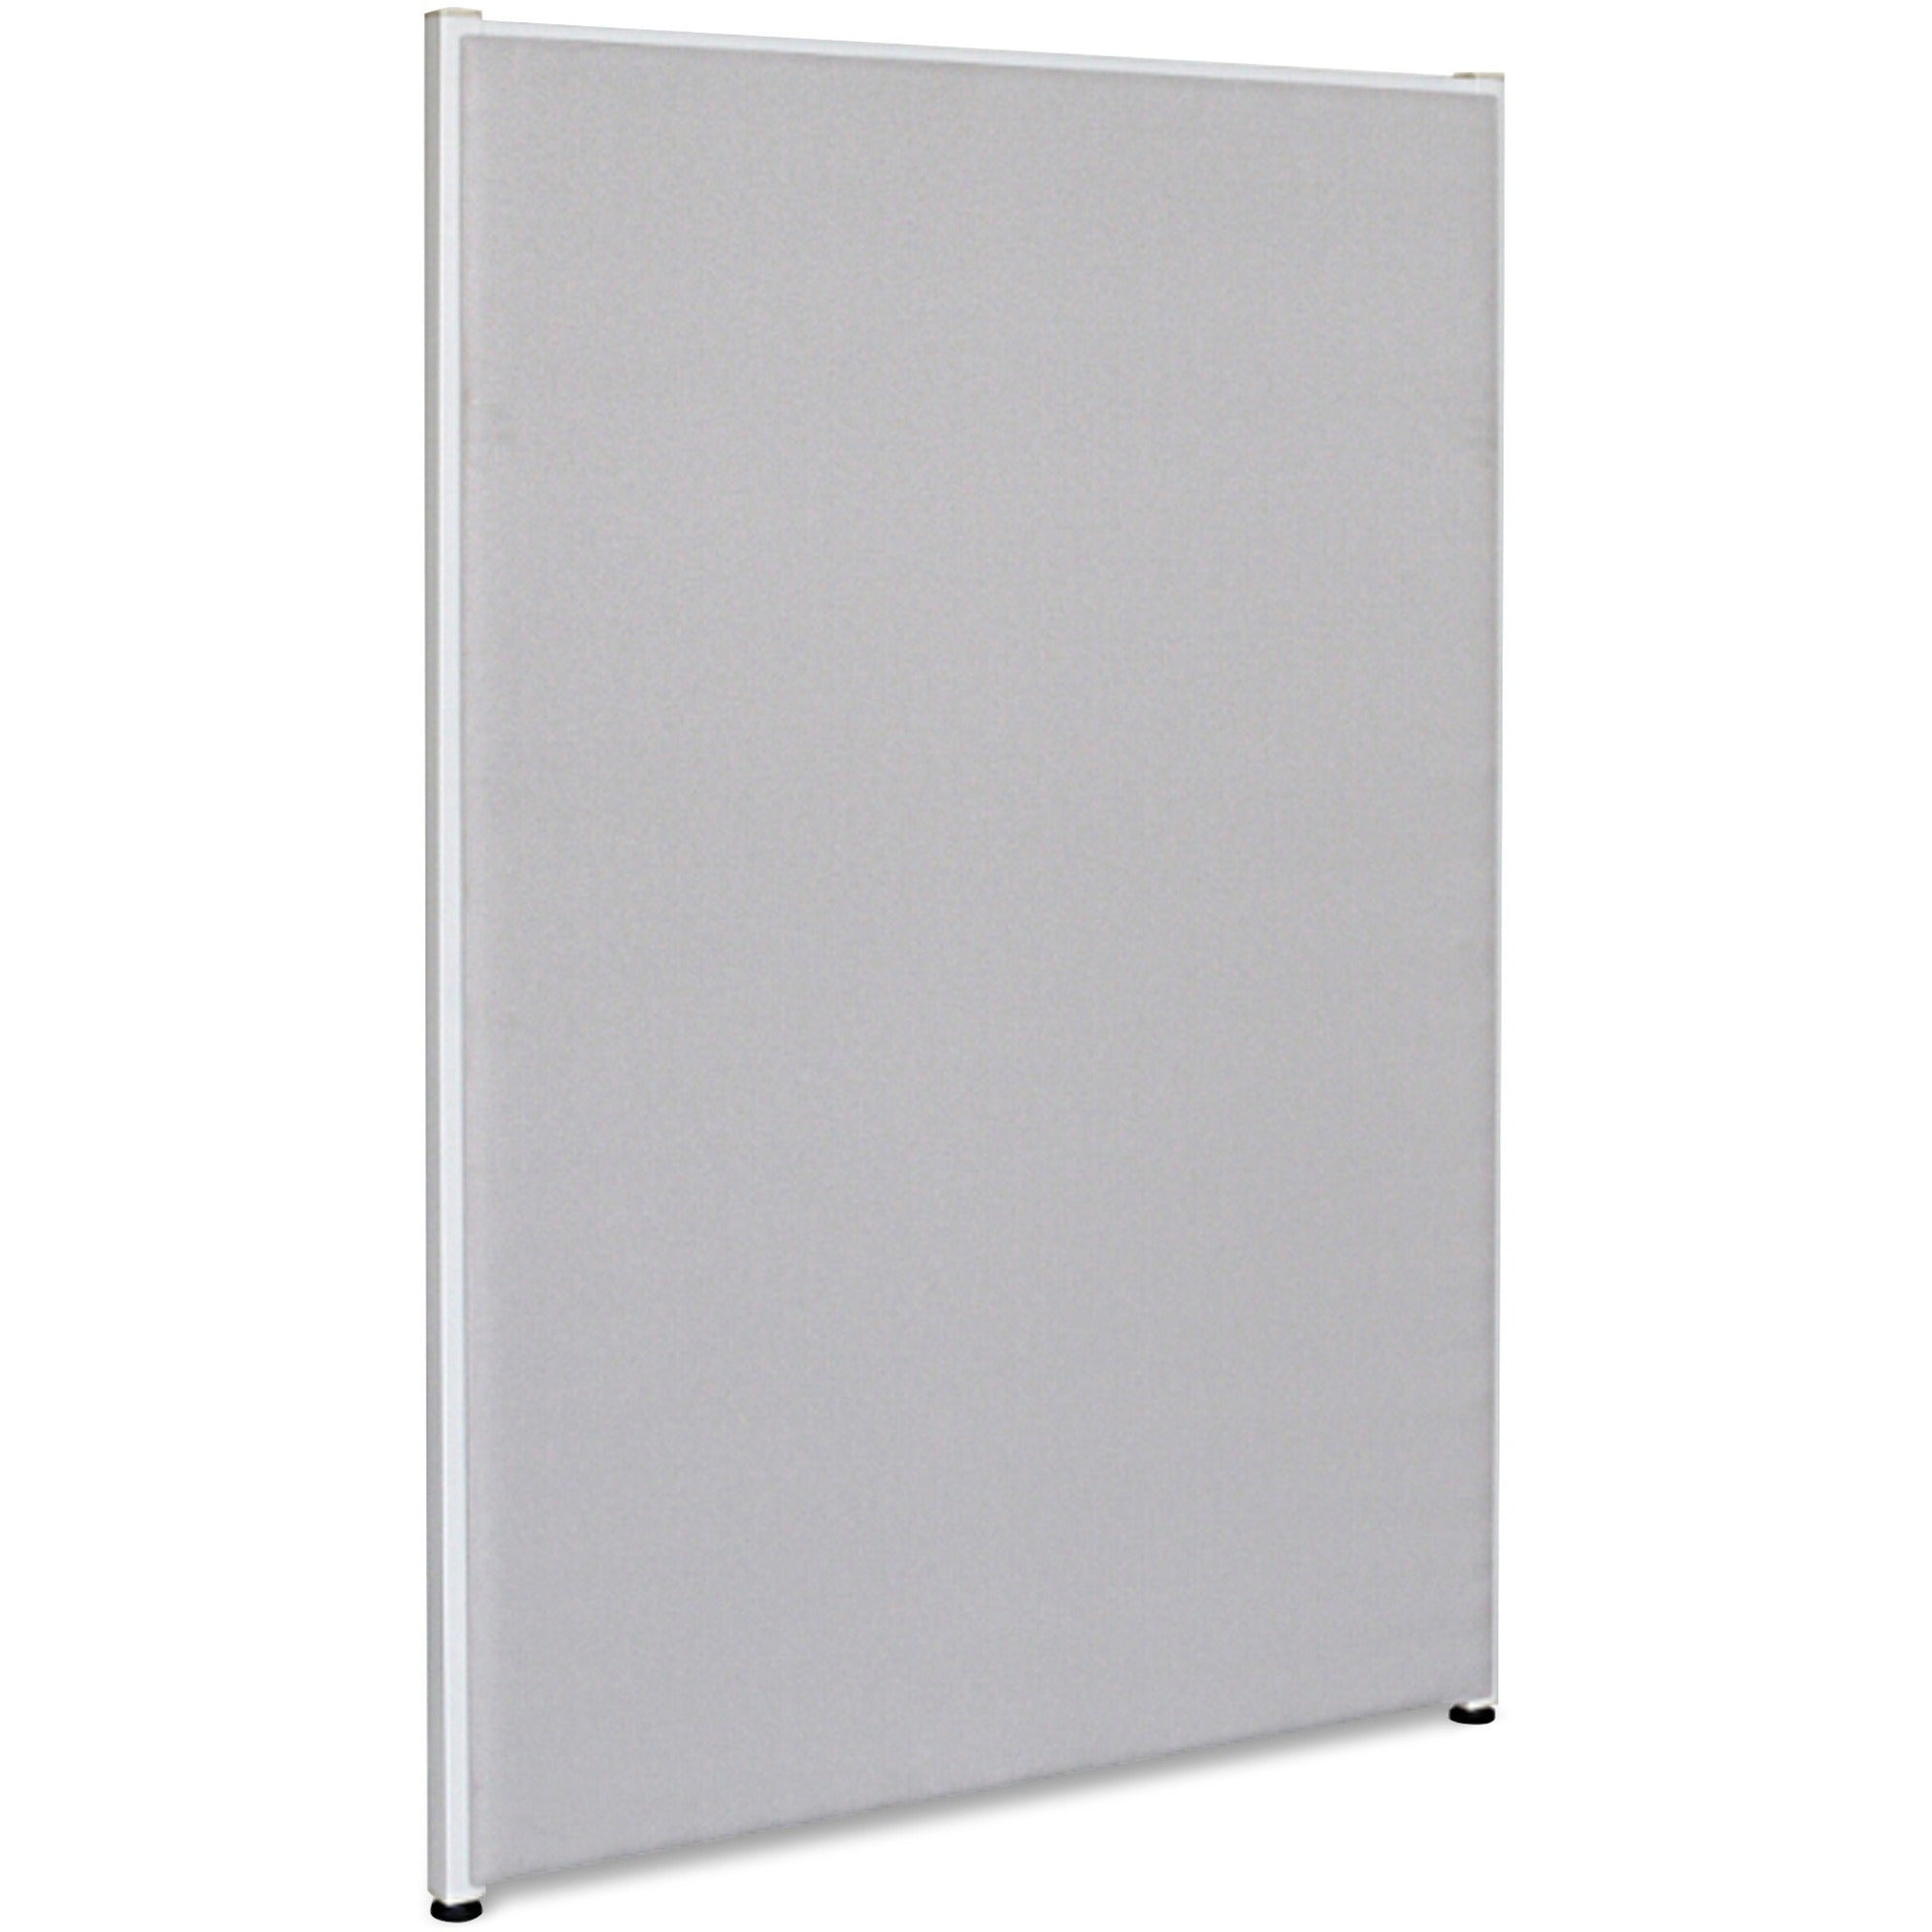 Lorell Panel System Partition Fabric Panel - 36.4" Width x 60" Height - Steel Frame - Gray - 1 Each - 